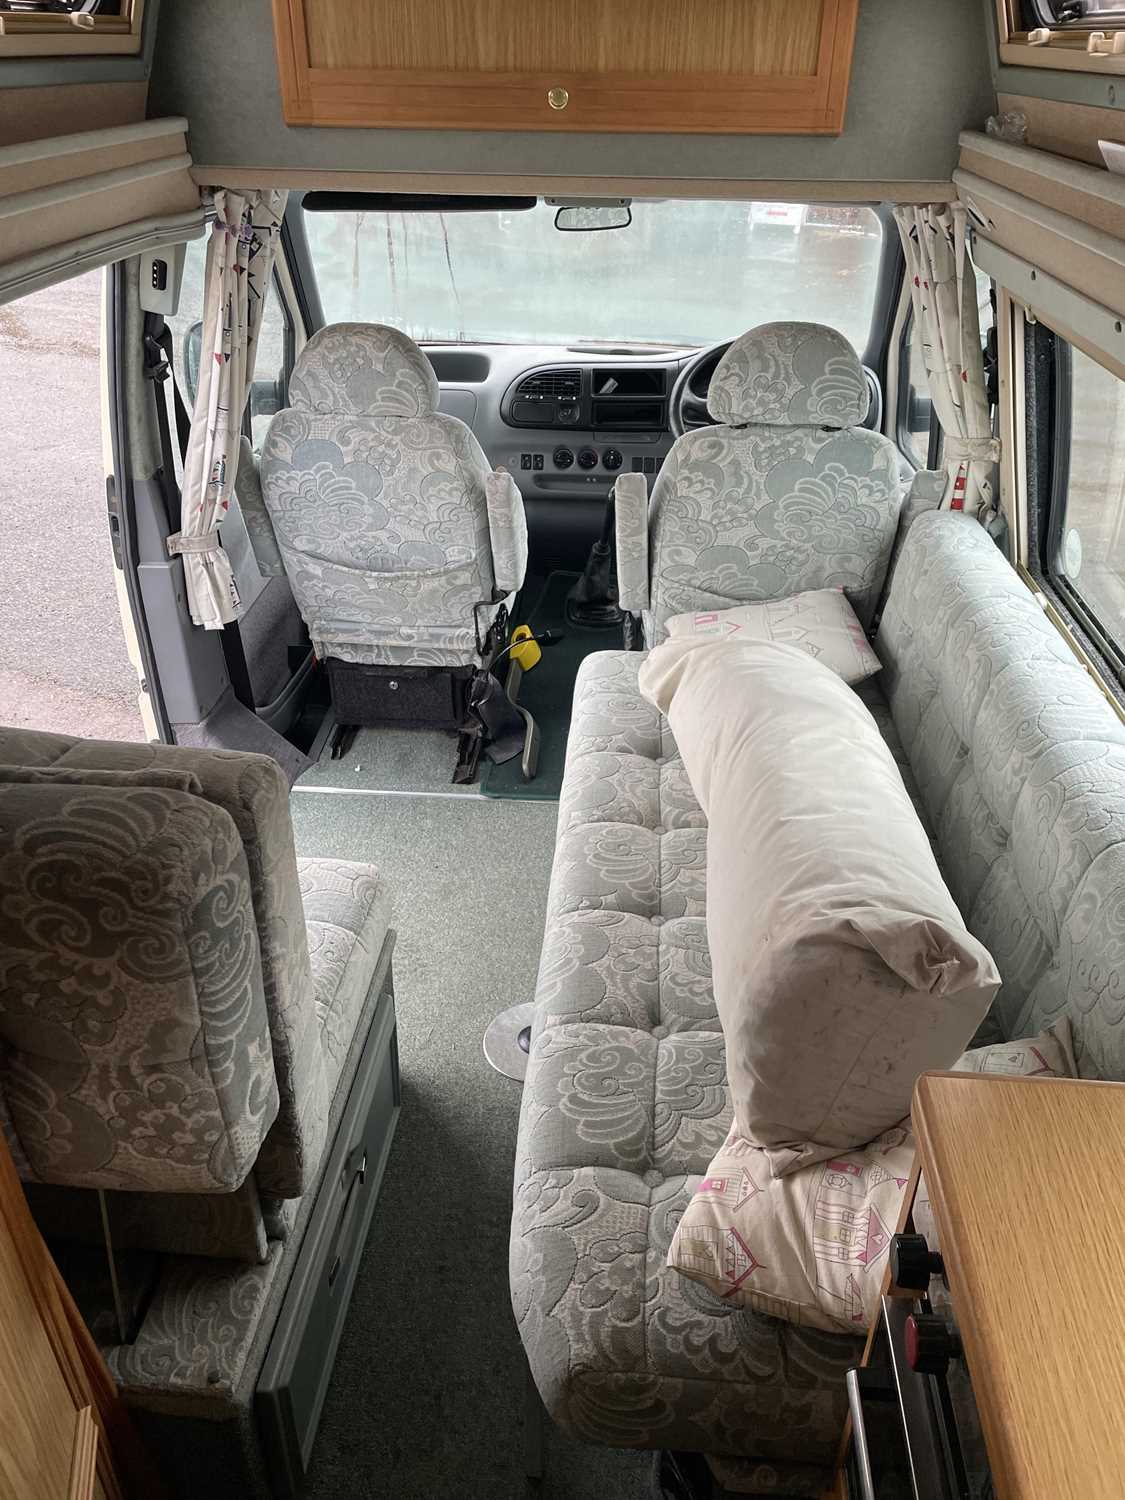 1996 Ford Transit Campervan Duetto Autosleeper - Image 12 of 17